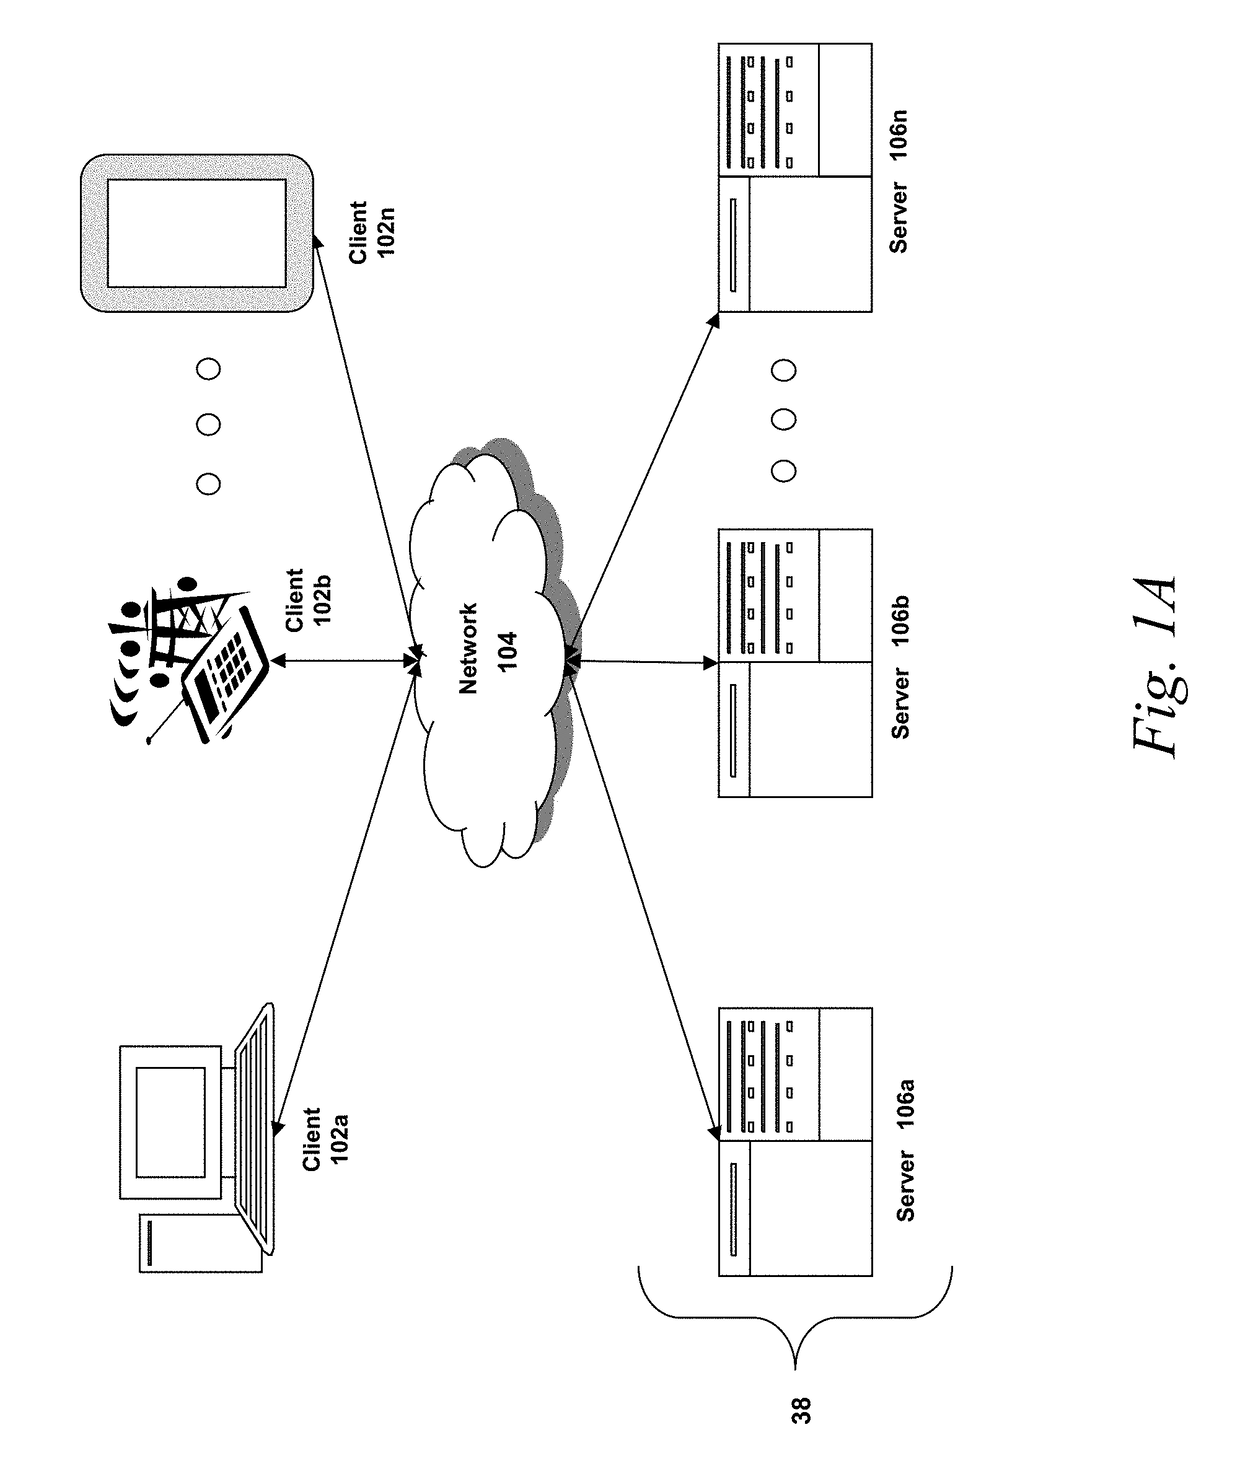 Systems and methods for reducing resource consumption via information technology infrastructure